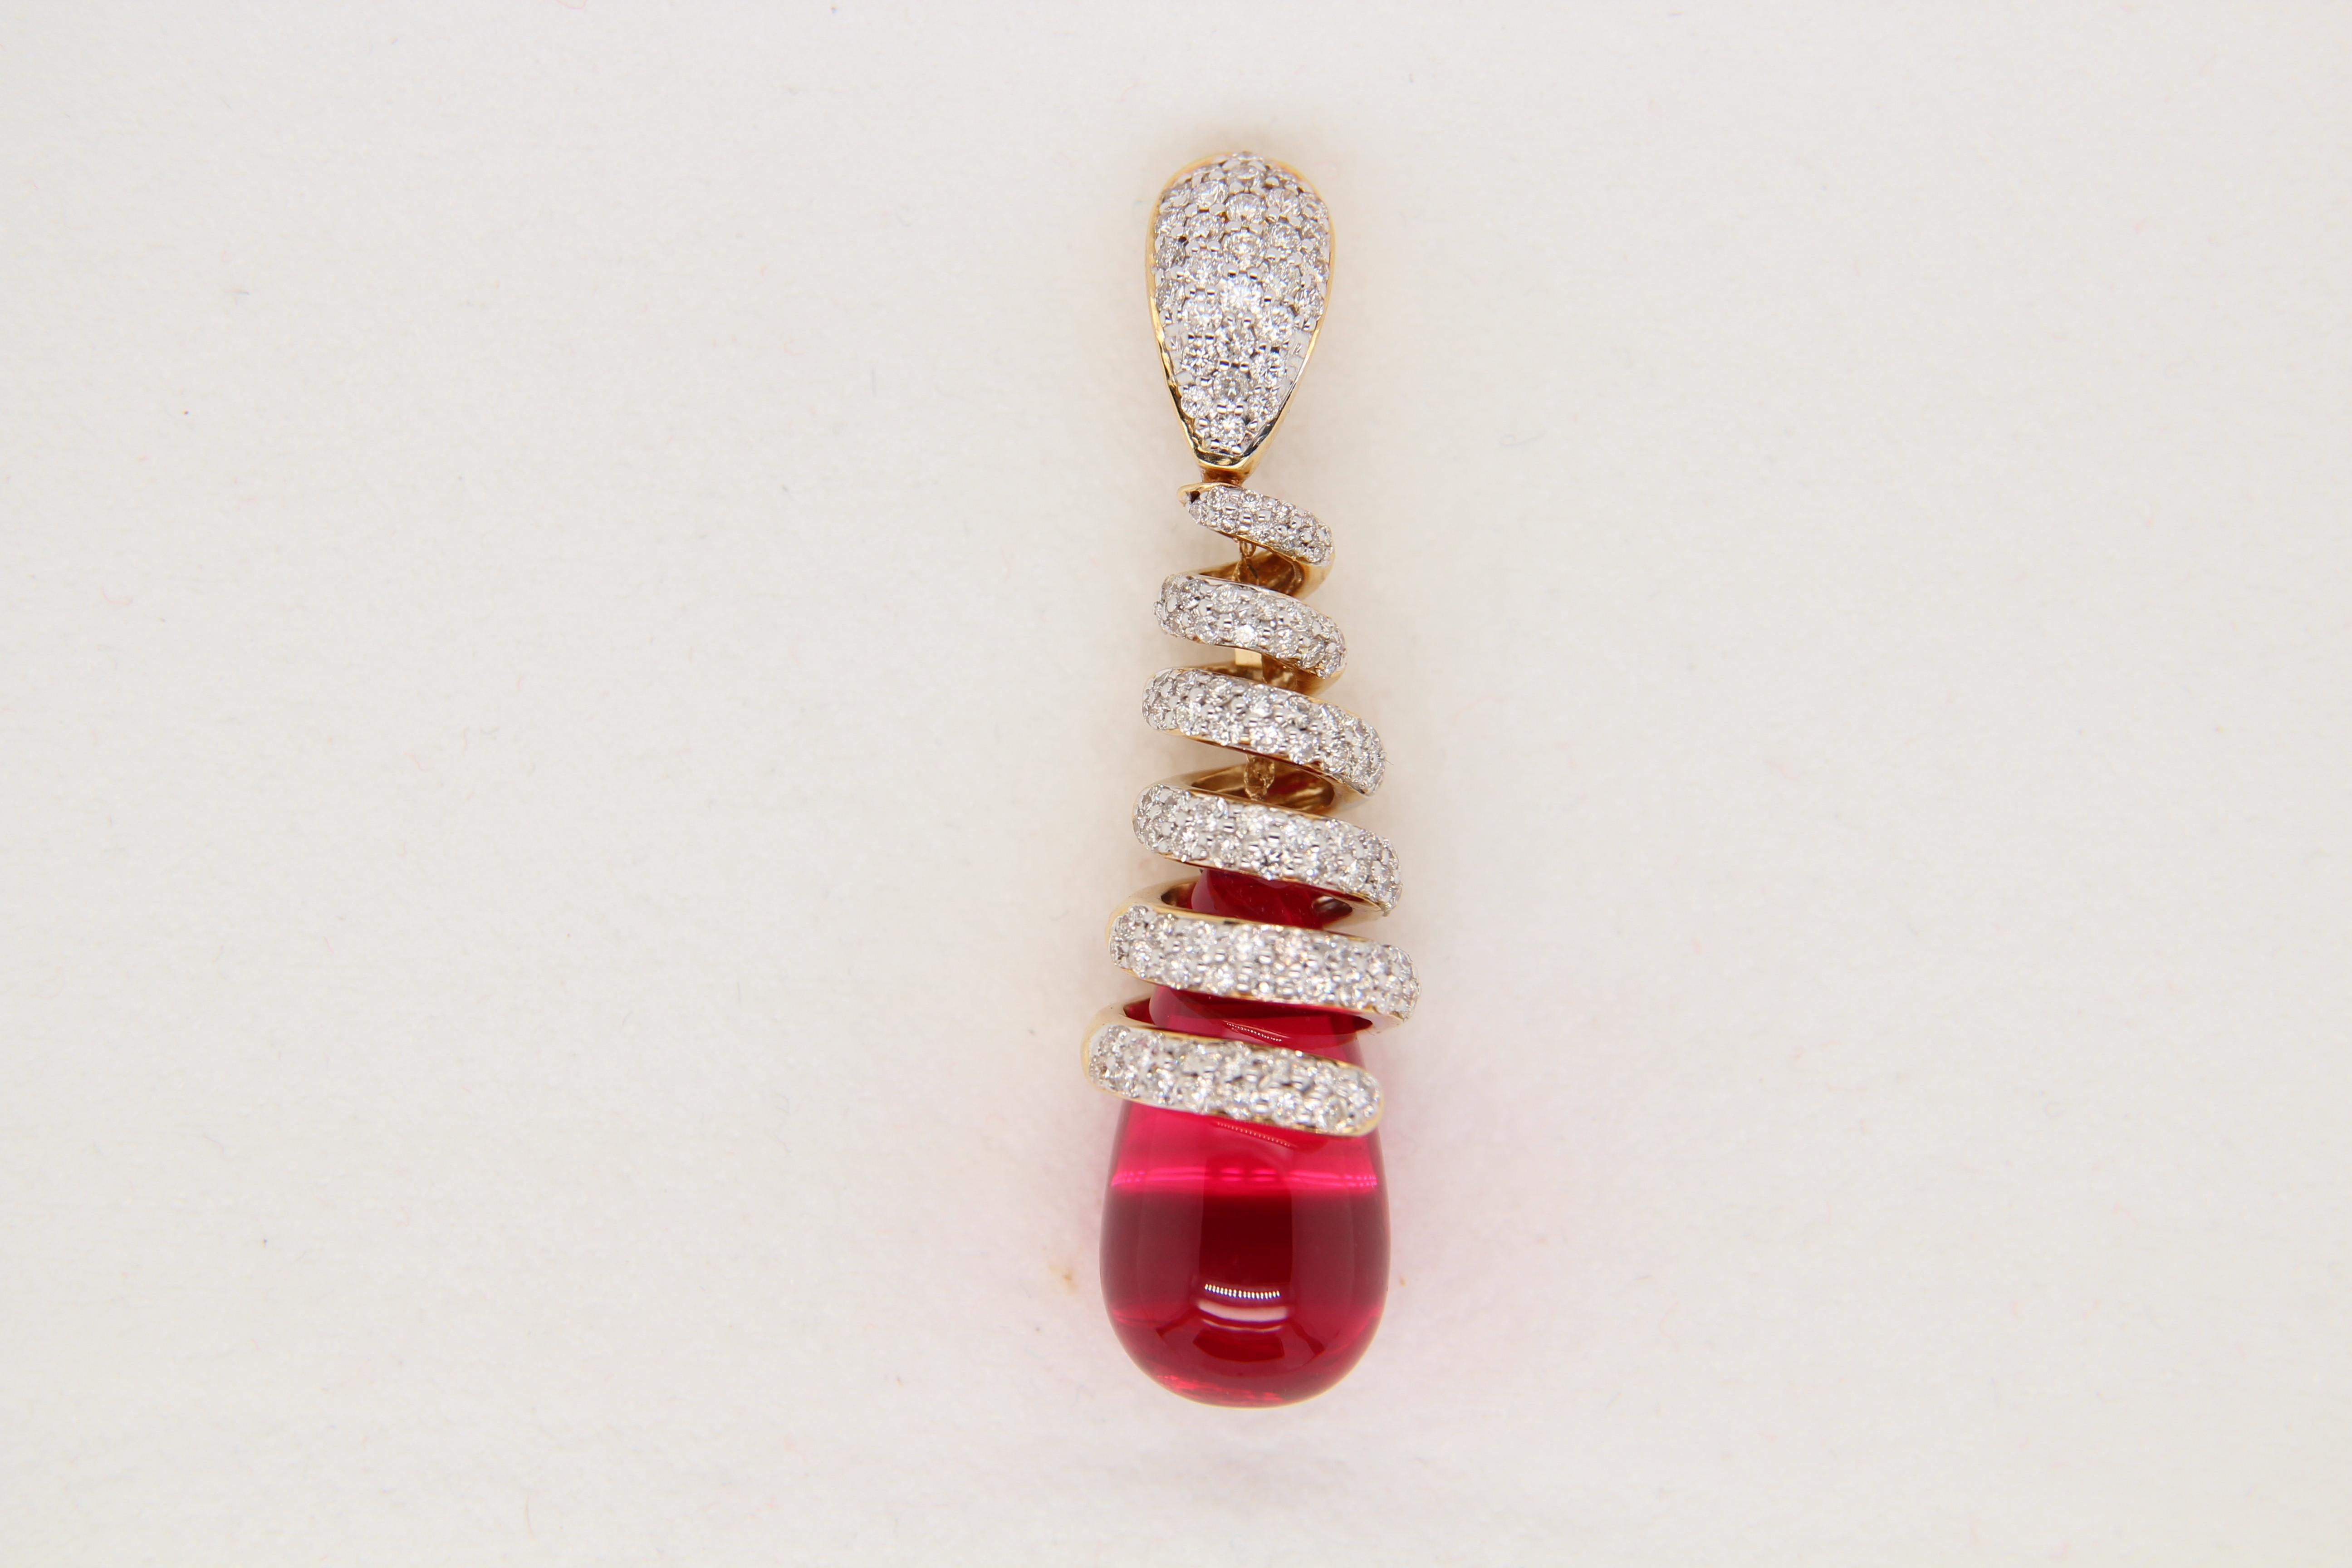 Round Cut 1.12 Carat Diamond and Glass Filled Ruby 12.50 Carat Pendant in 18 Karat Gold For Sale